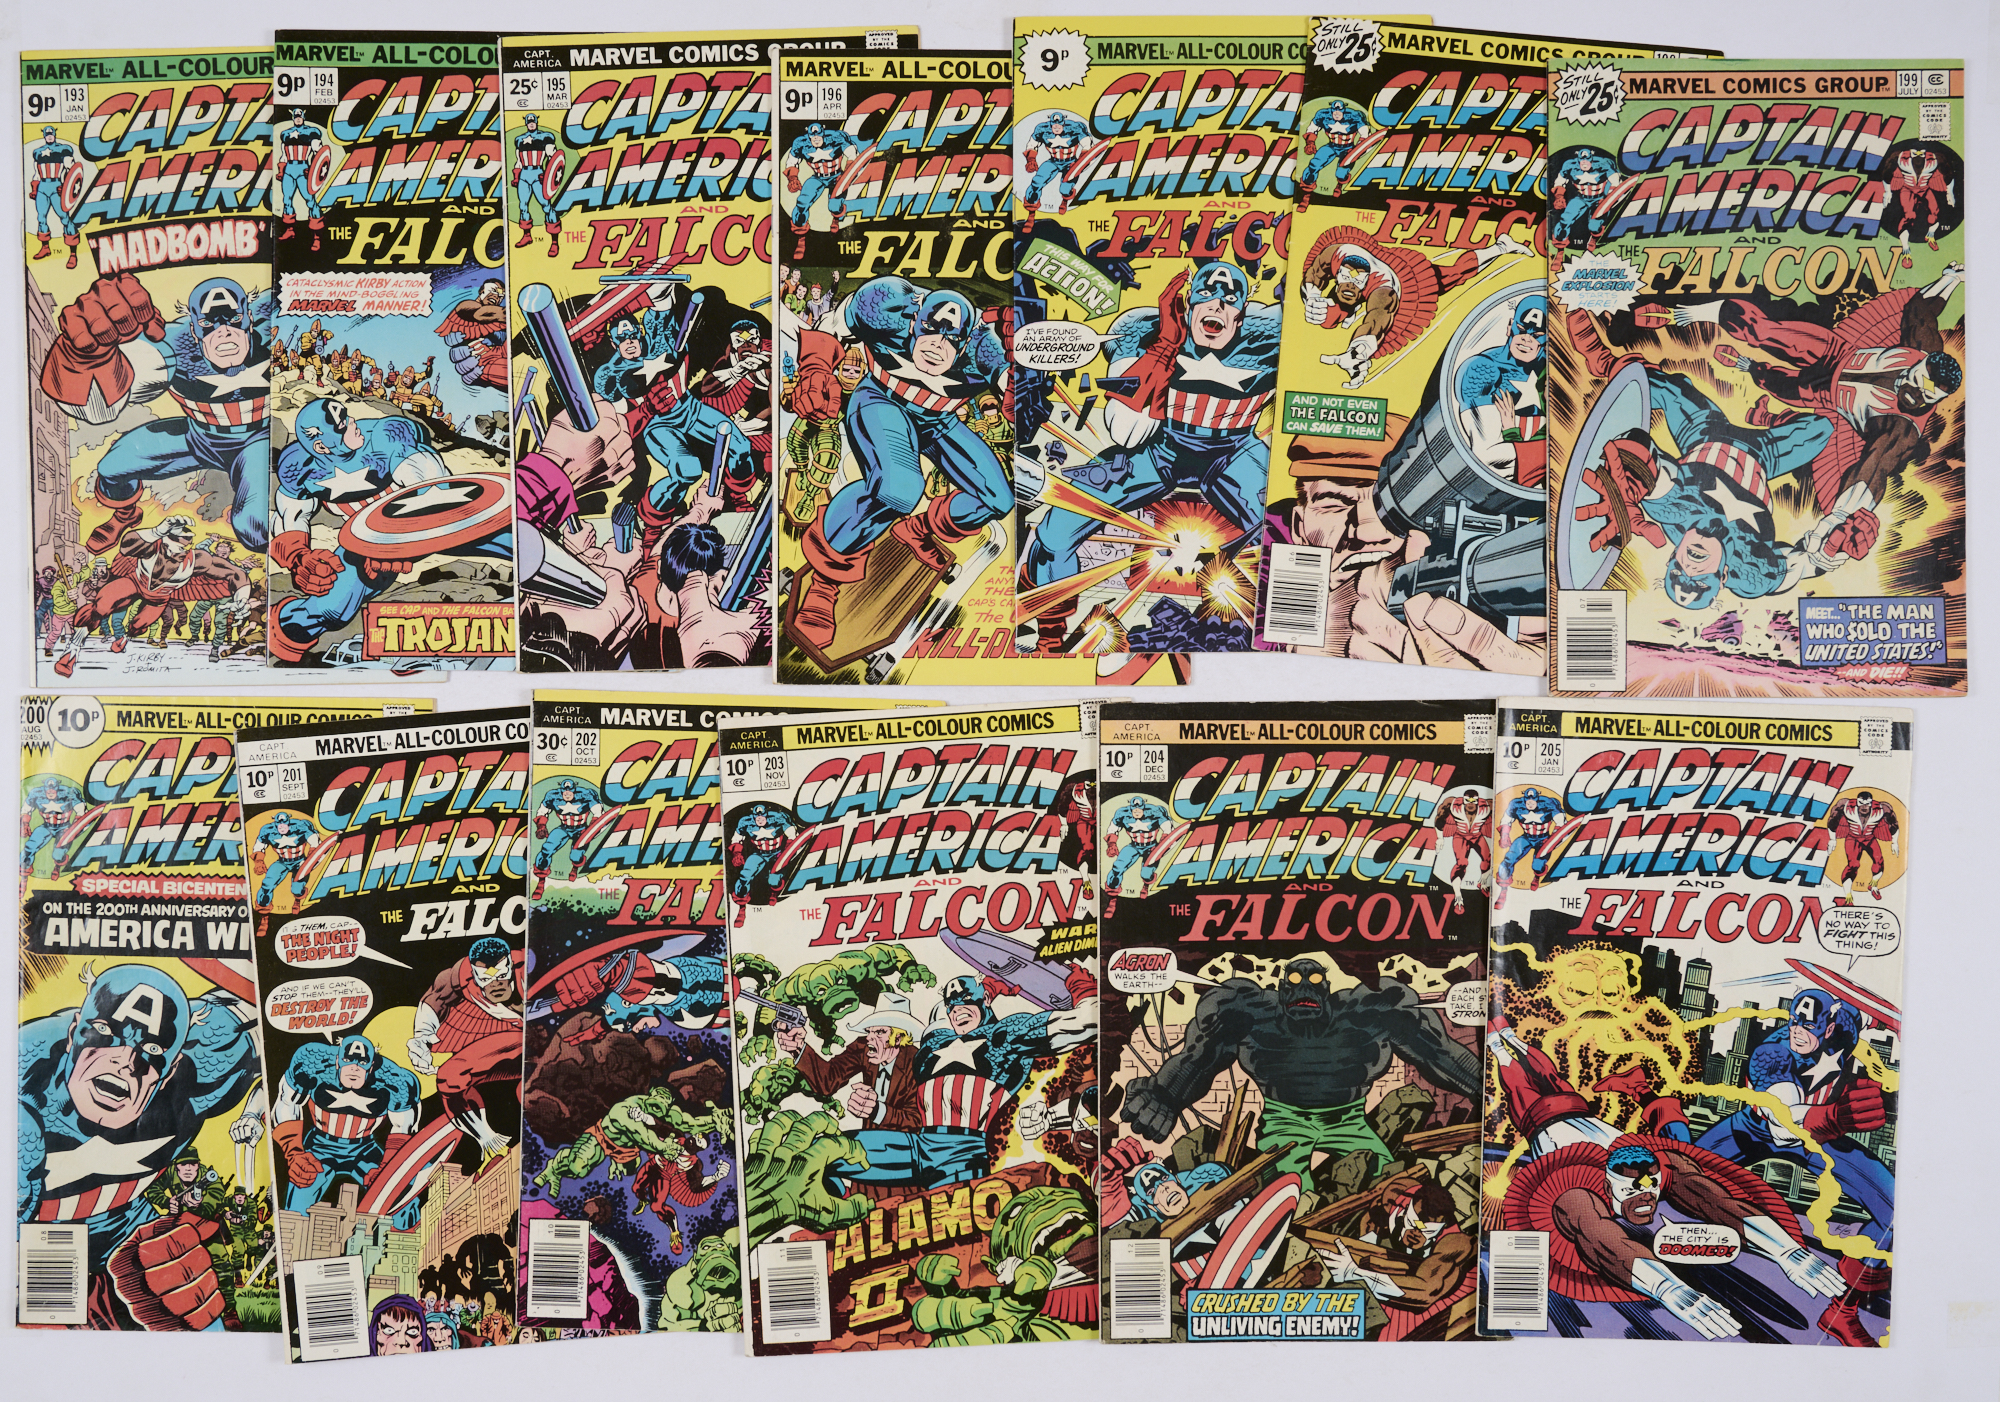 Captain America (1976-77) 193-205. # 200 [vg+], balance issues [fn/vfn] (13). No Reserve